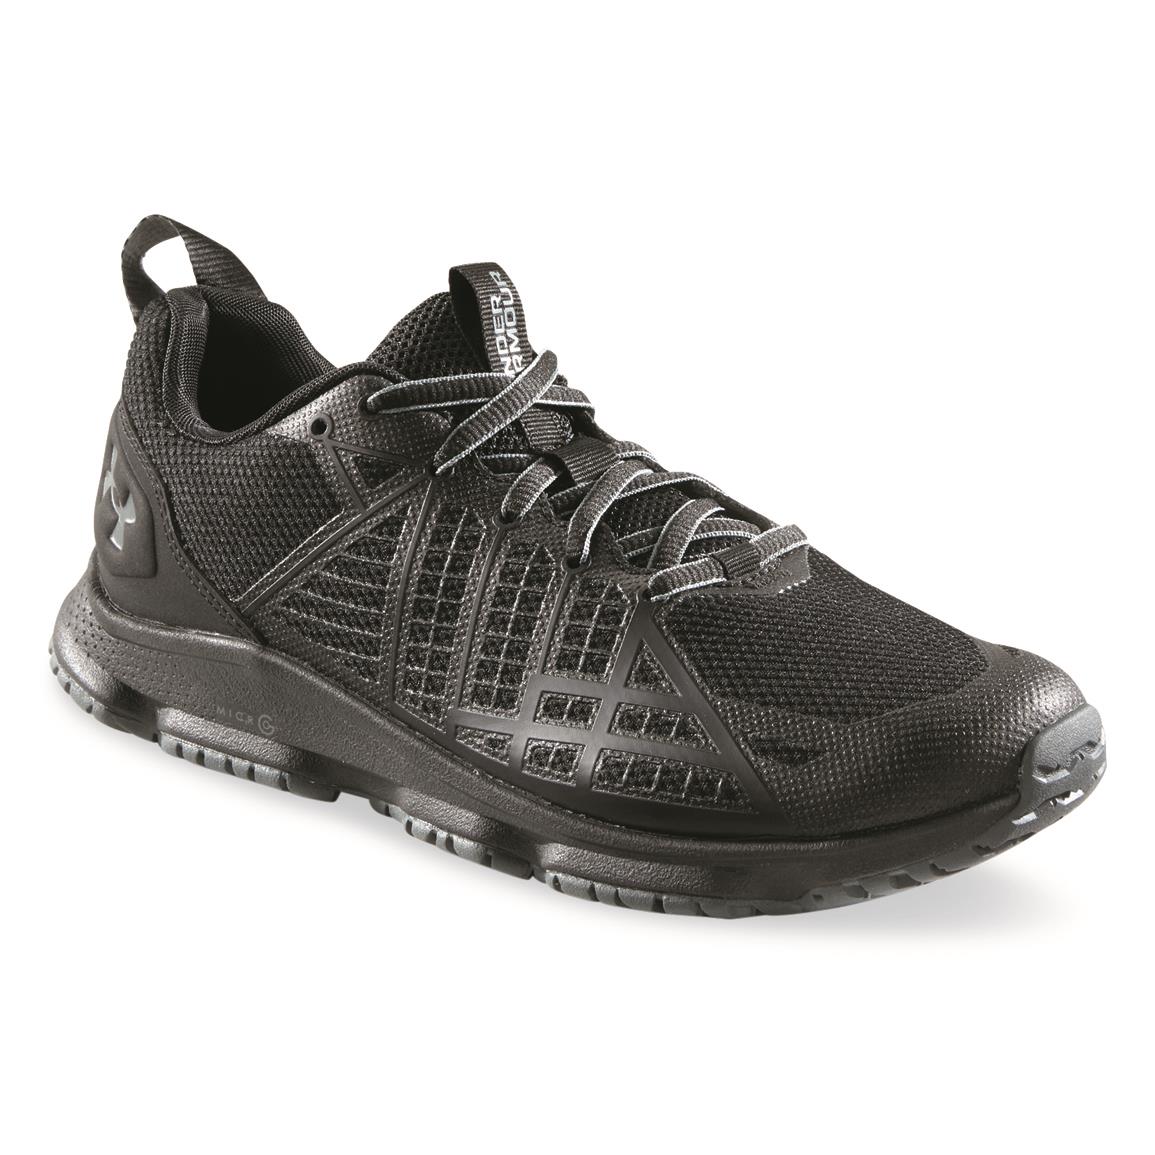 Under Armour Women's UA Micro G Strikefast Tactical Shoes 3024954